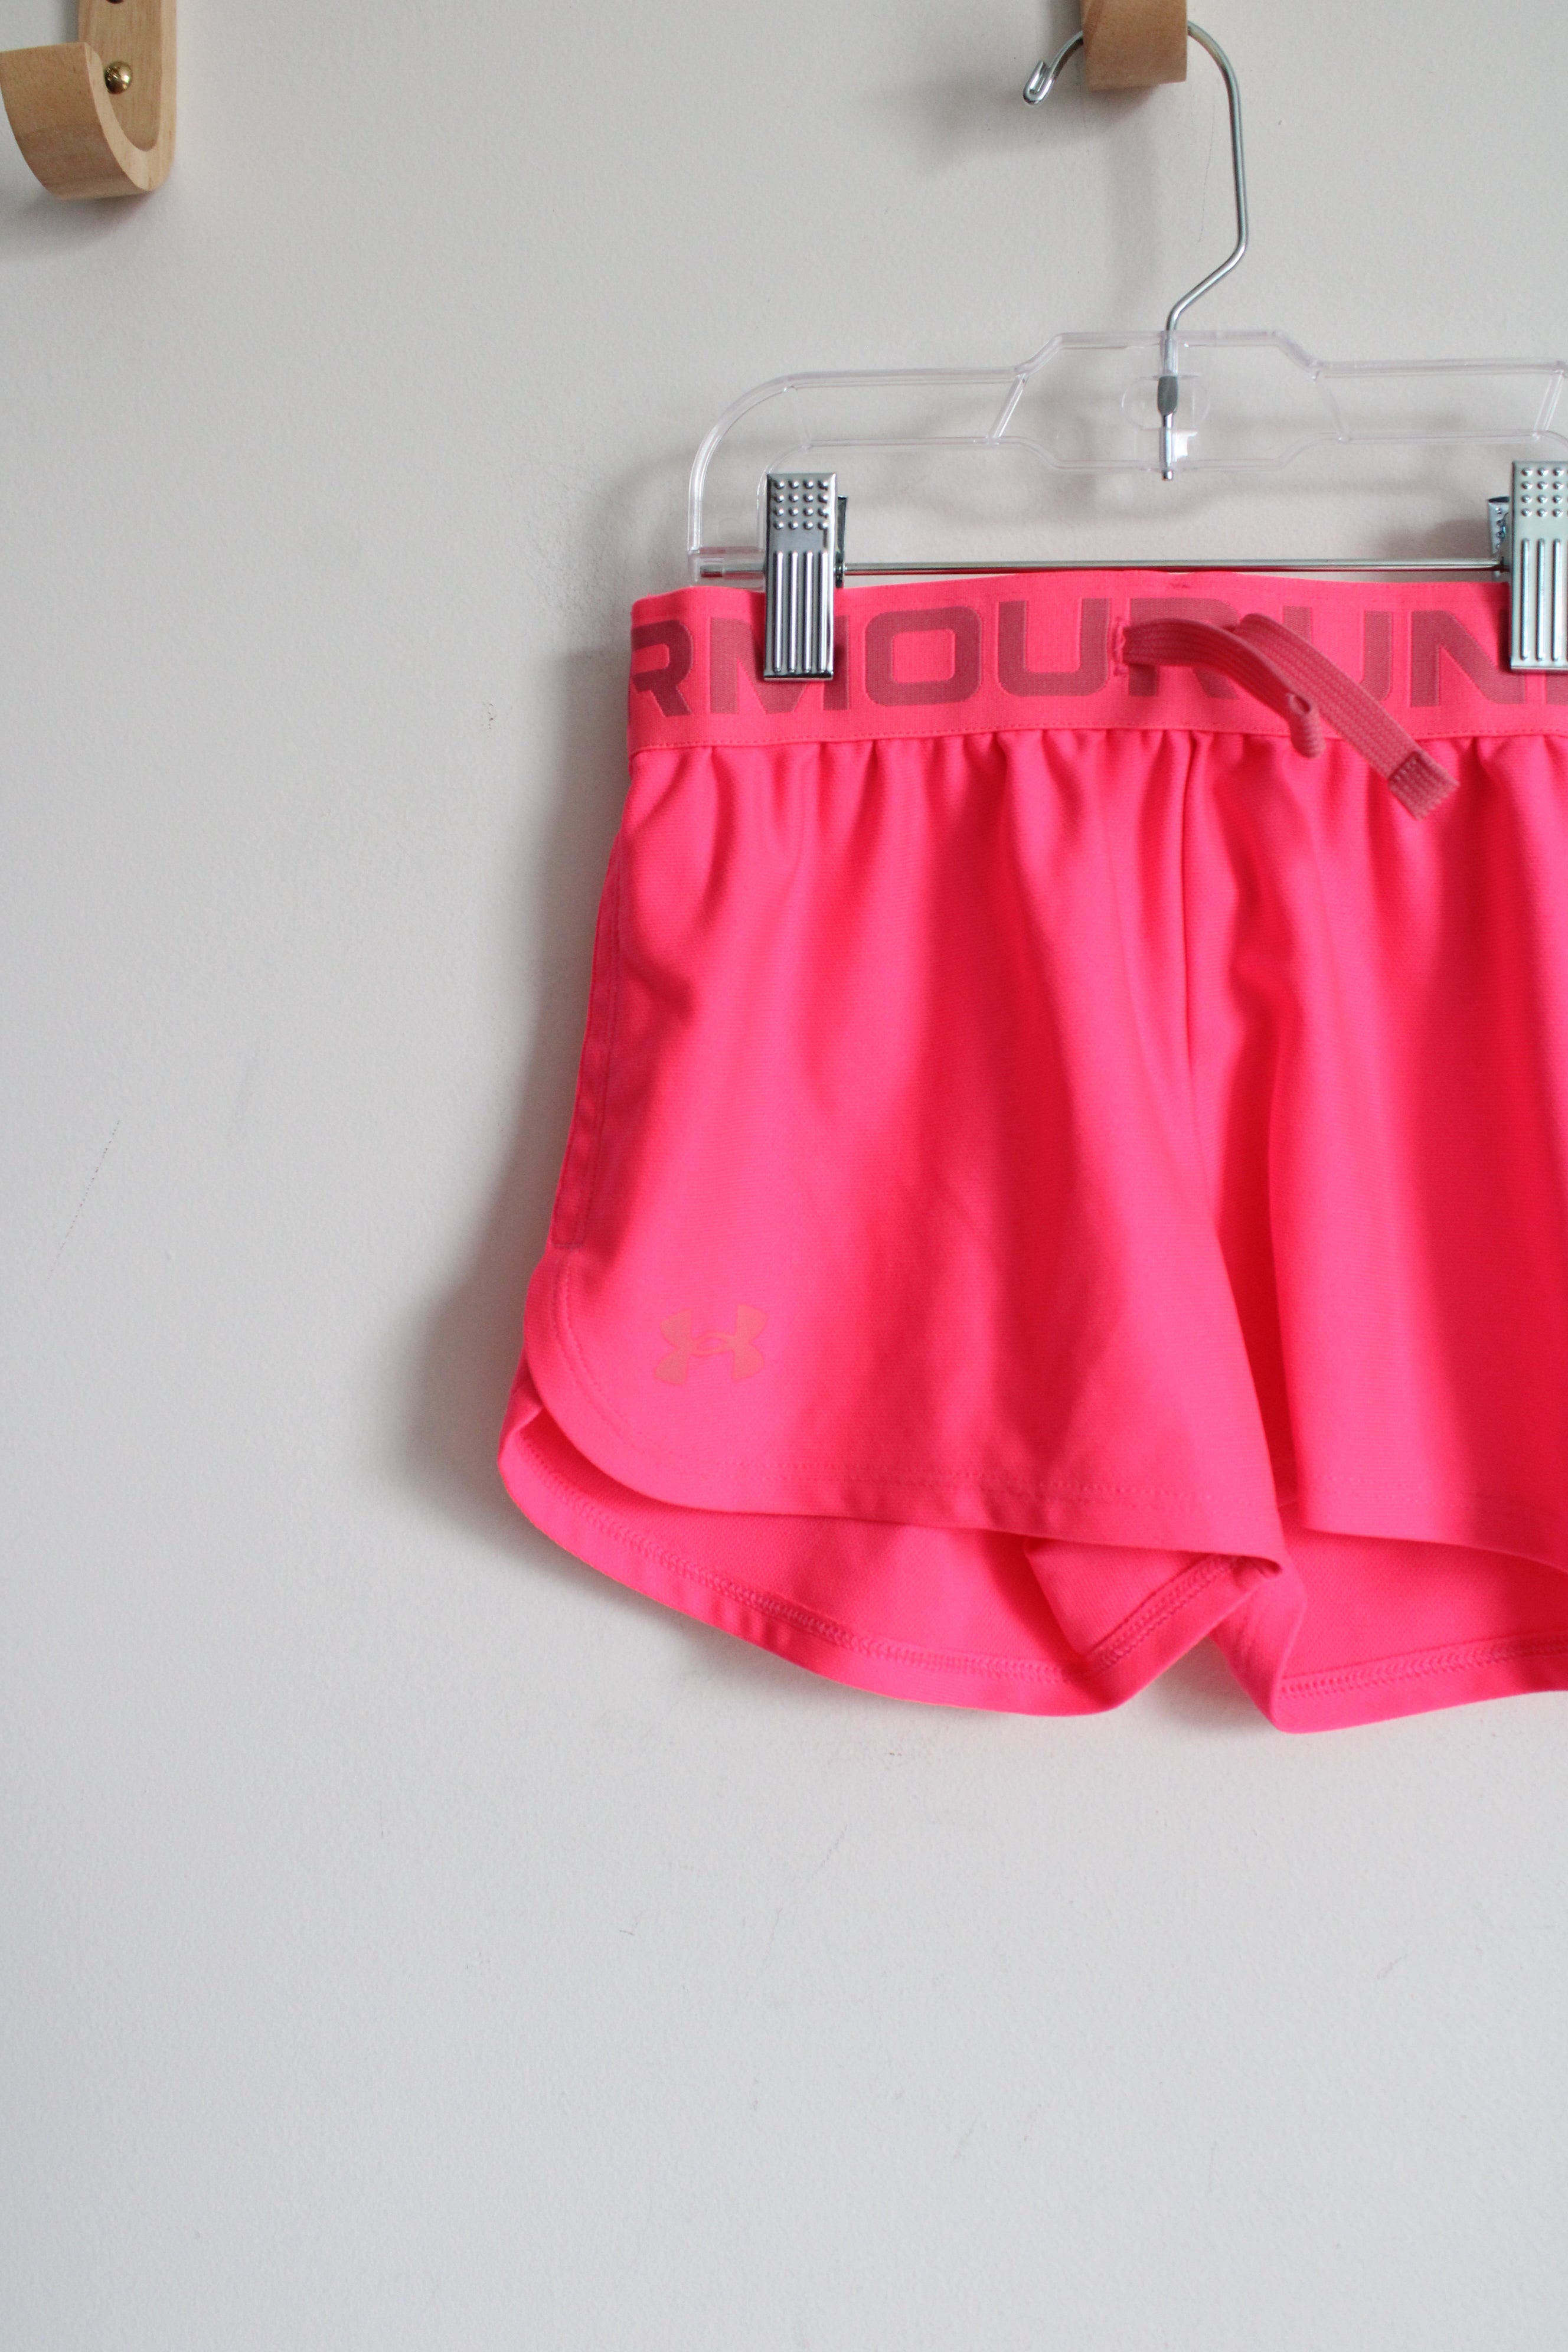 Under Armour Neon Pink Athletic Shorts | Youth S (8)